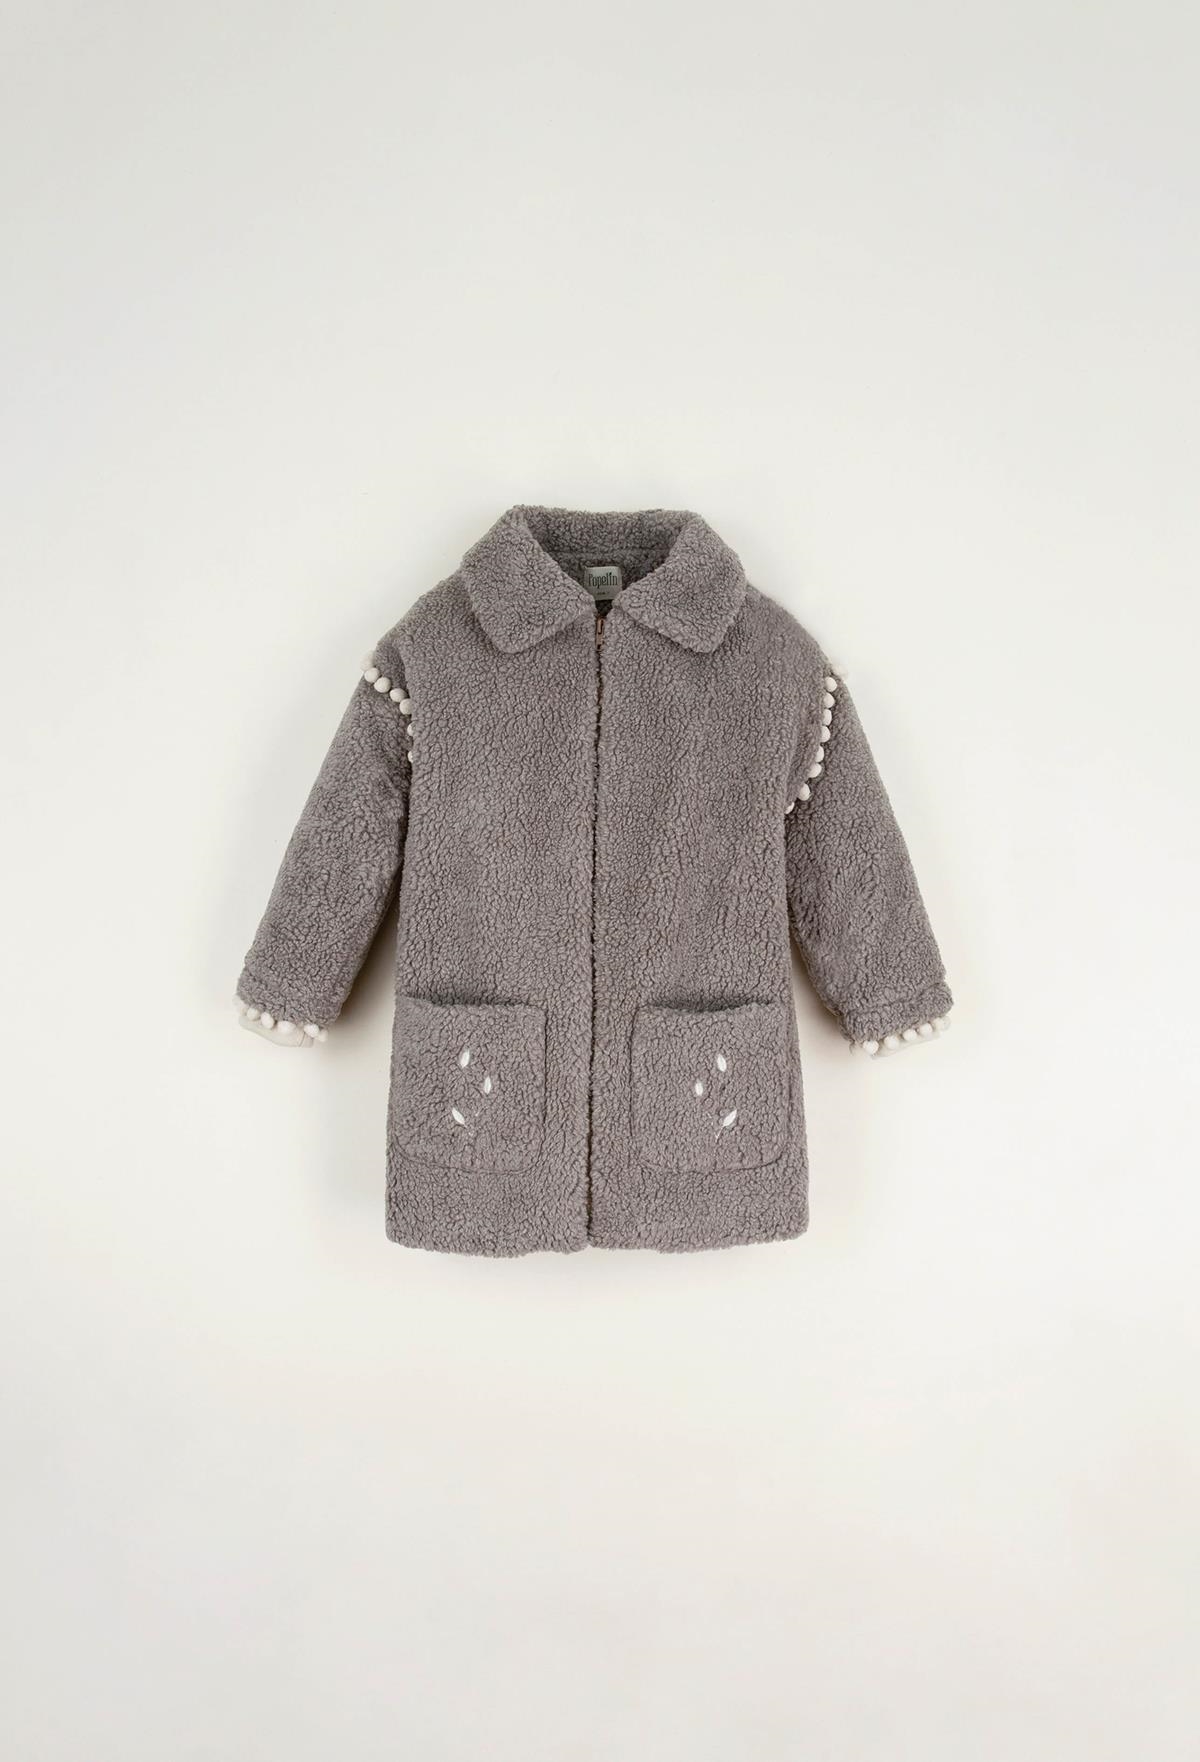 Mod.40.2 Taupe embroidered coat with tassels | AW22.23 Mod.40.2 Taupe embroidered coat with tassels